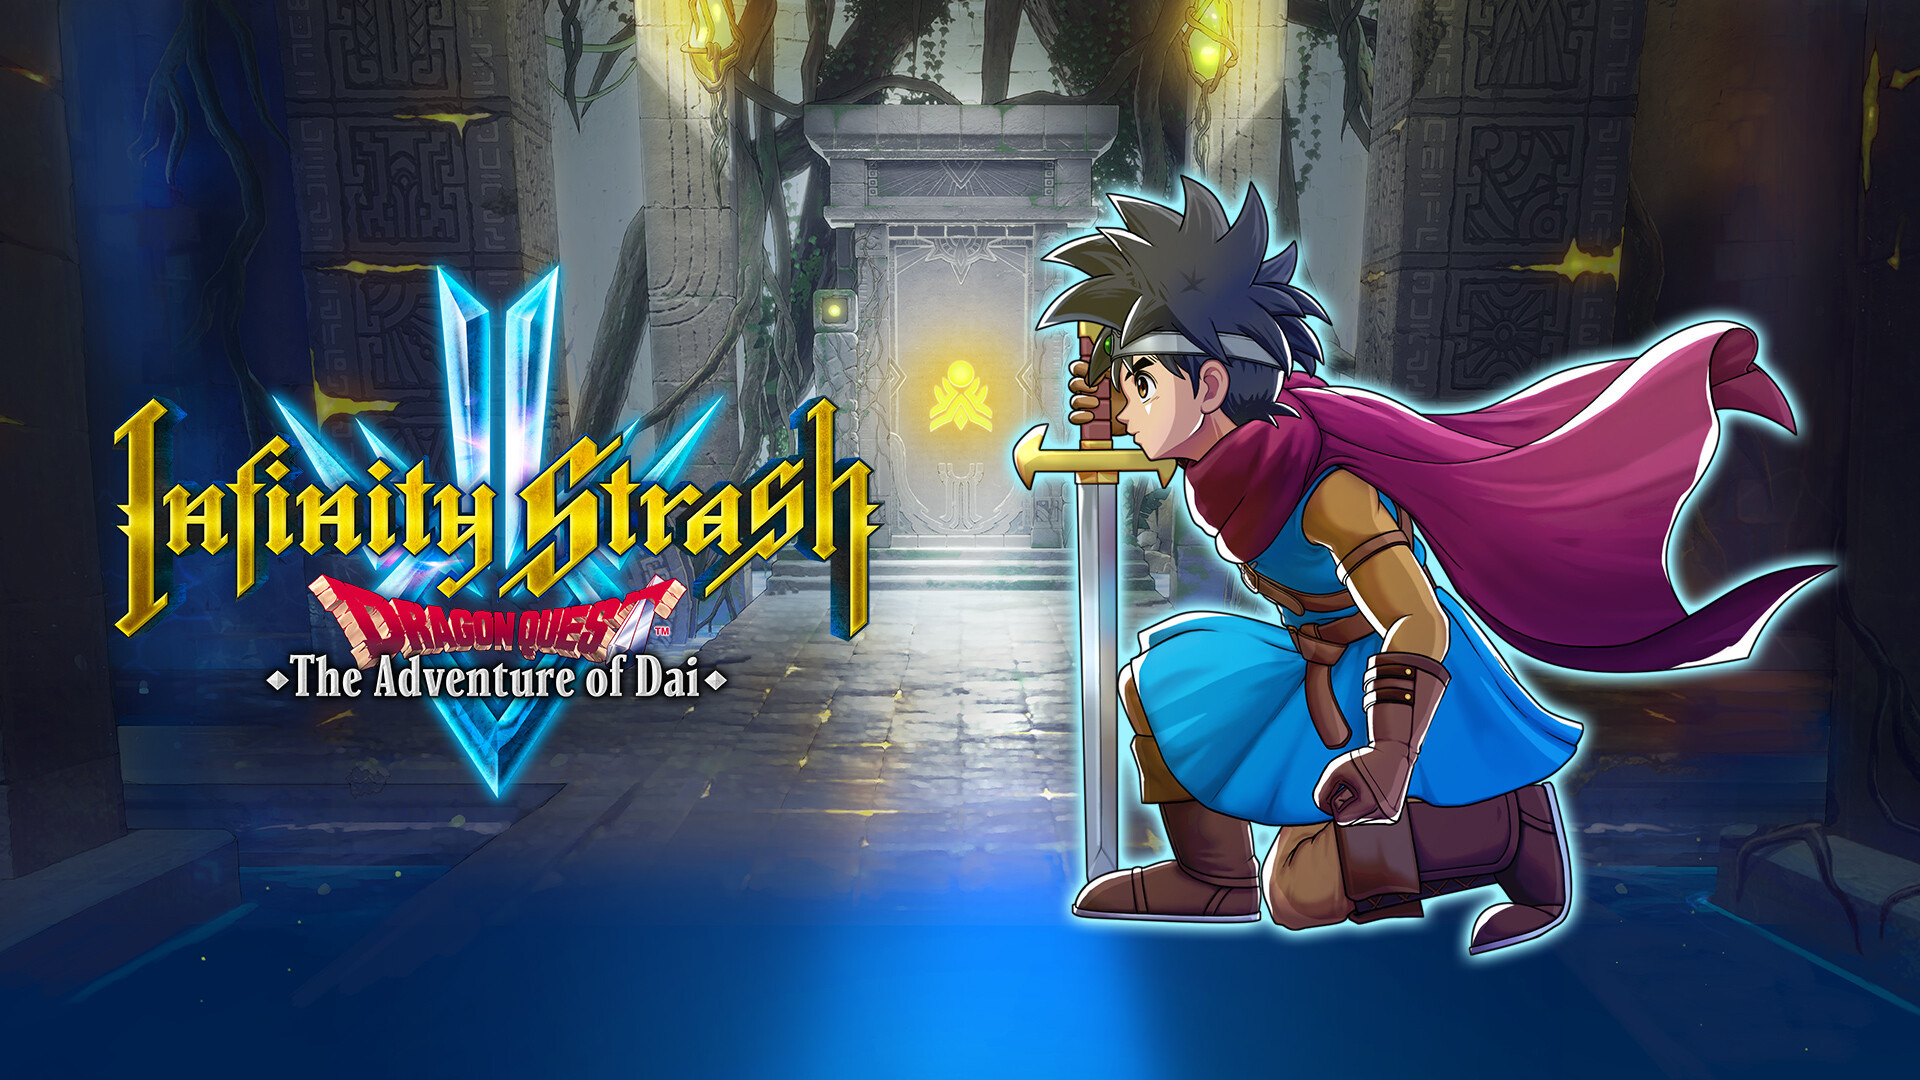 Infinity Strash DRAGON QUEST Adventure Of Dai VALE A PENA?- Review/Análise  